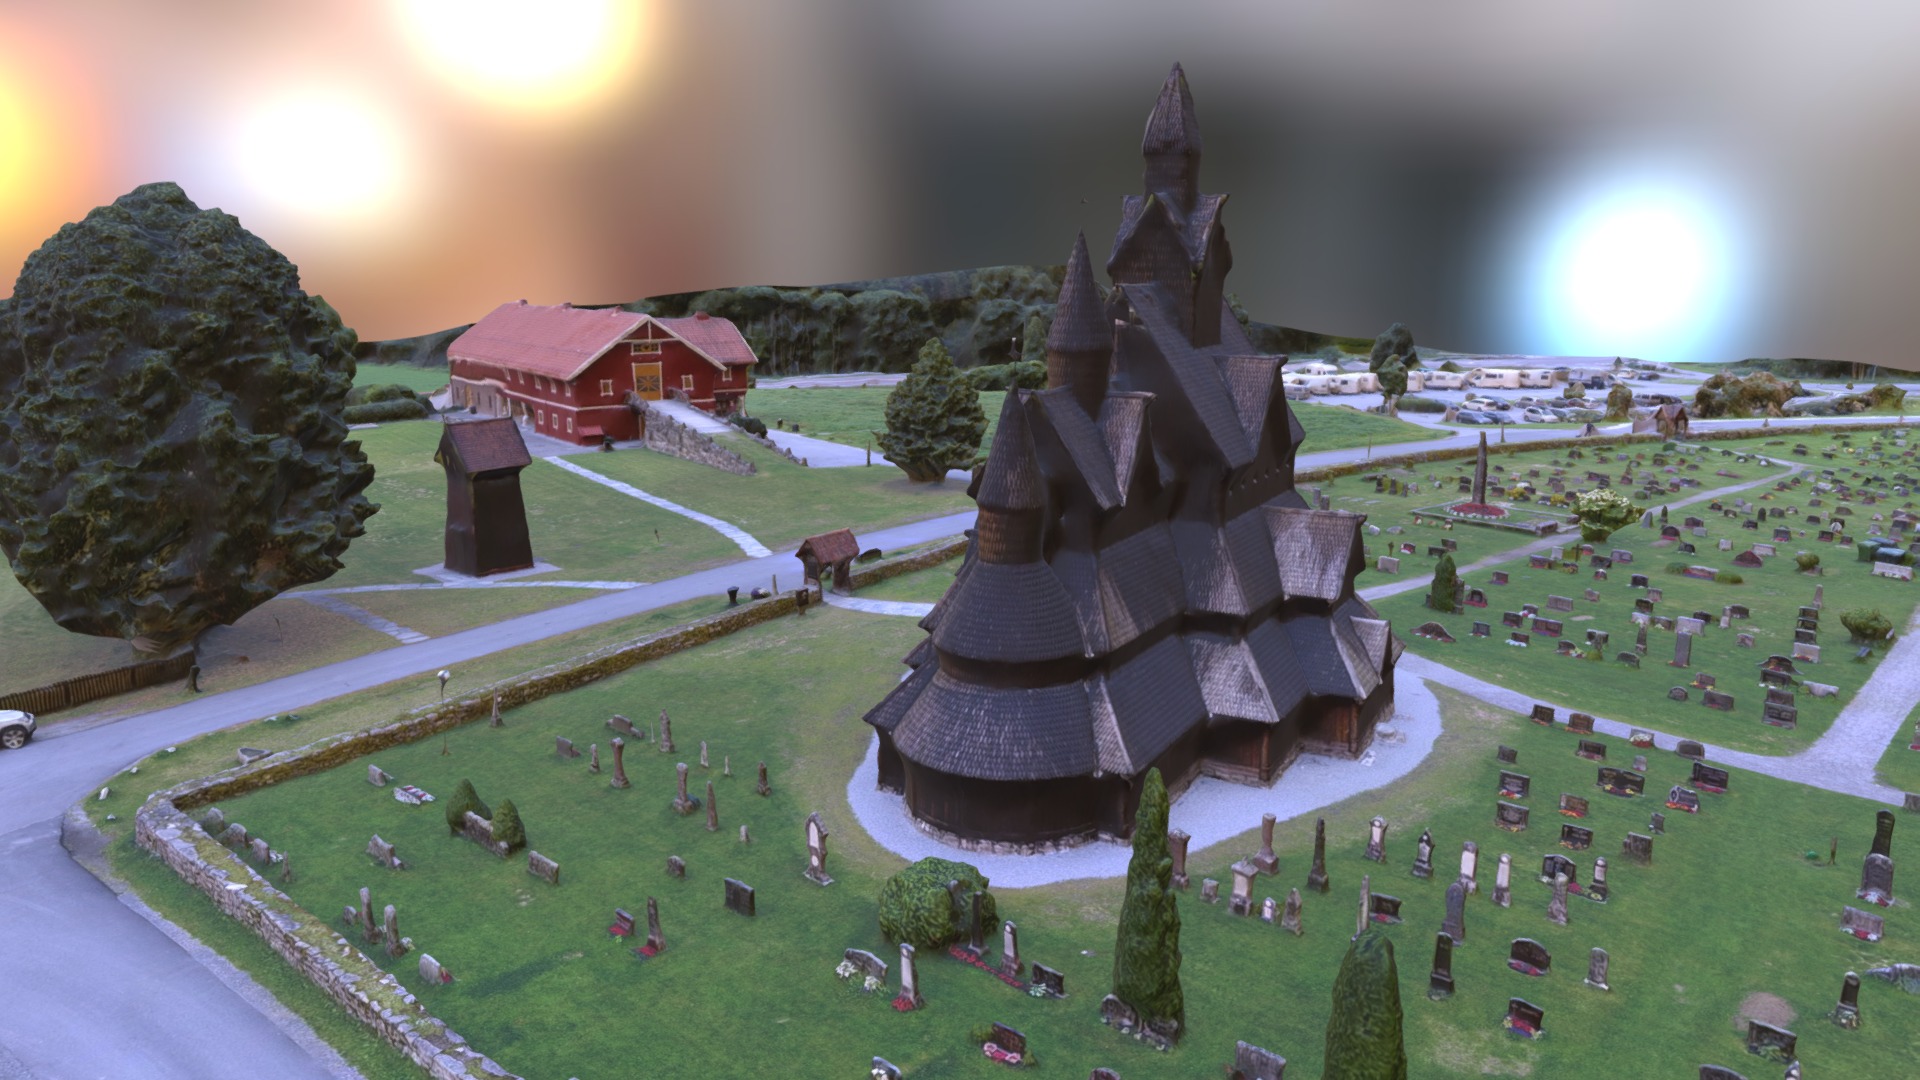 3D model Heddal Stave Church, Norway - This is a 3D model of the Heddal Stave Church, Norway. The 3D model is about a video game of a building and trees.